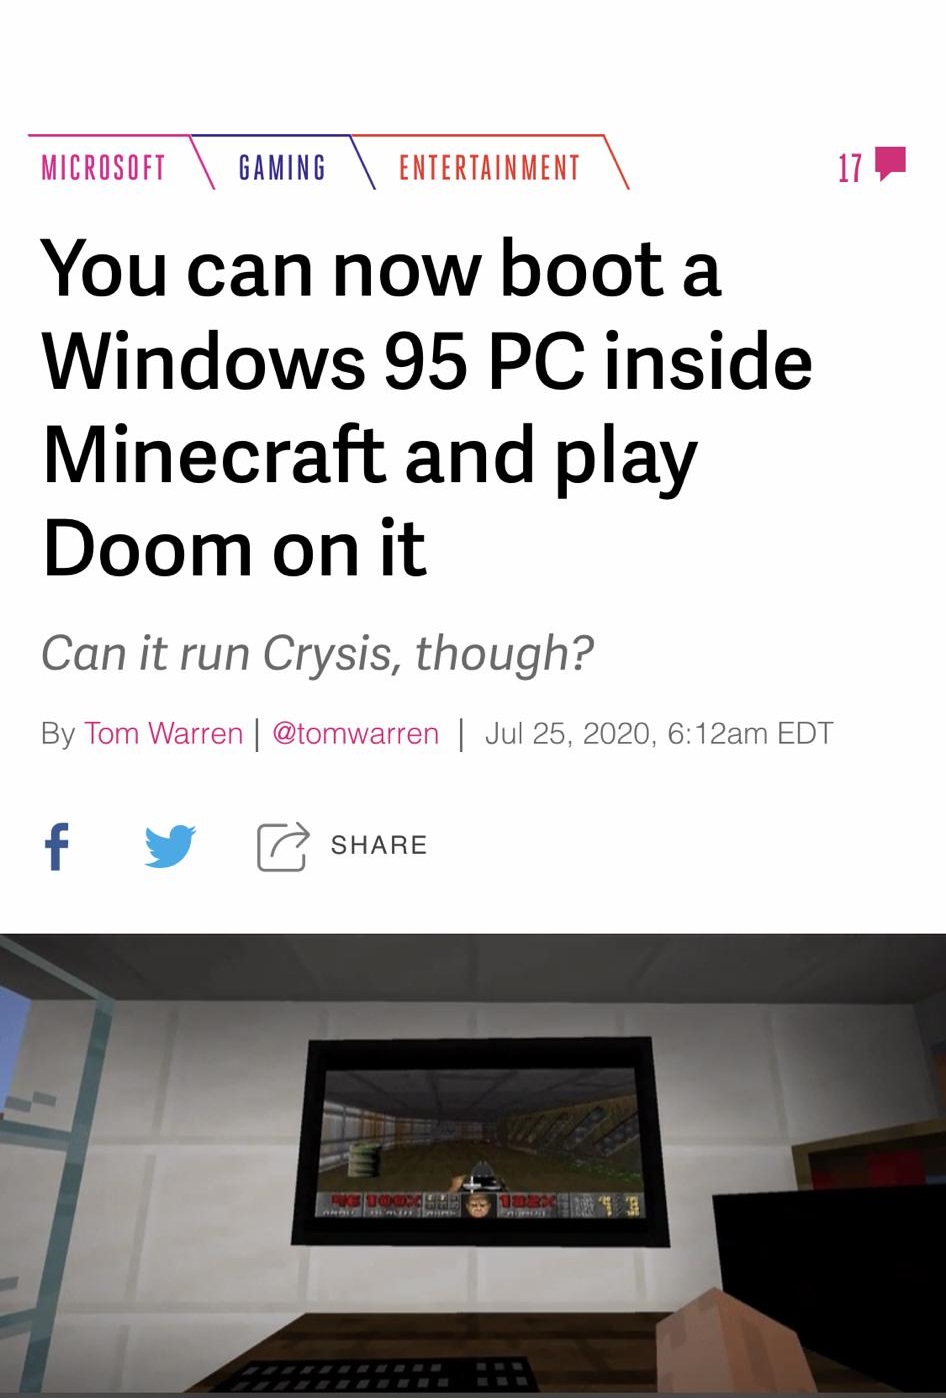 multimedia - Microsoft Gaming Entertainment 17 You can now boot a Windows 95 Pc inside Minecraft and play Doom on it Can it run Crysis, though? By Tom Warren | | , am Edt f |